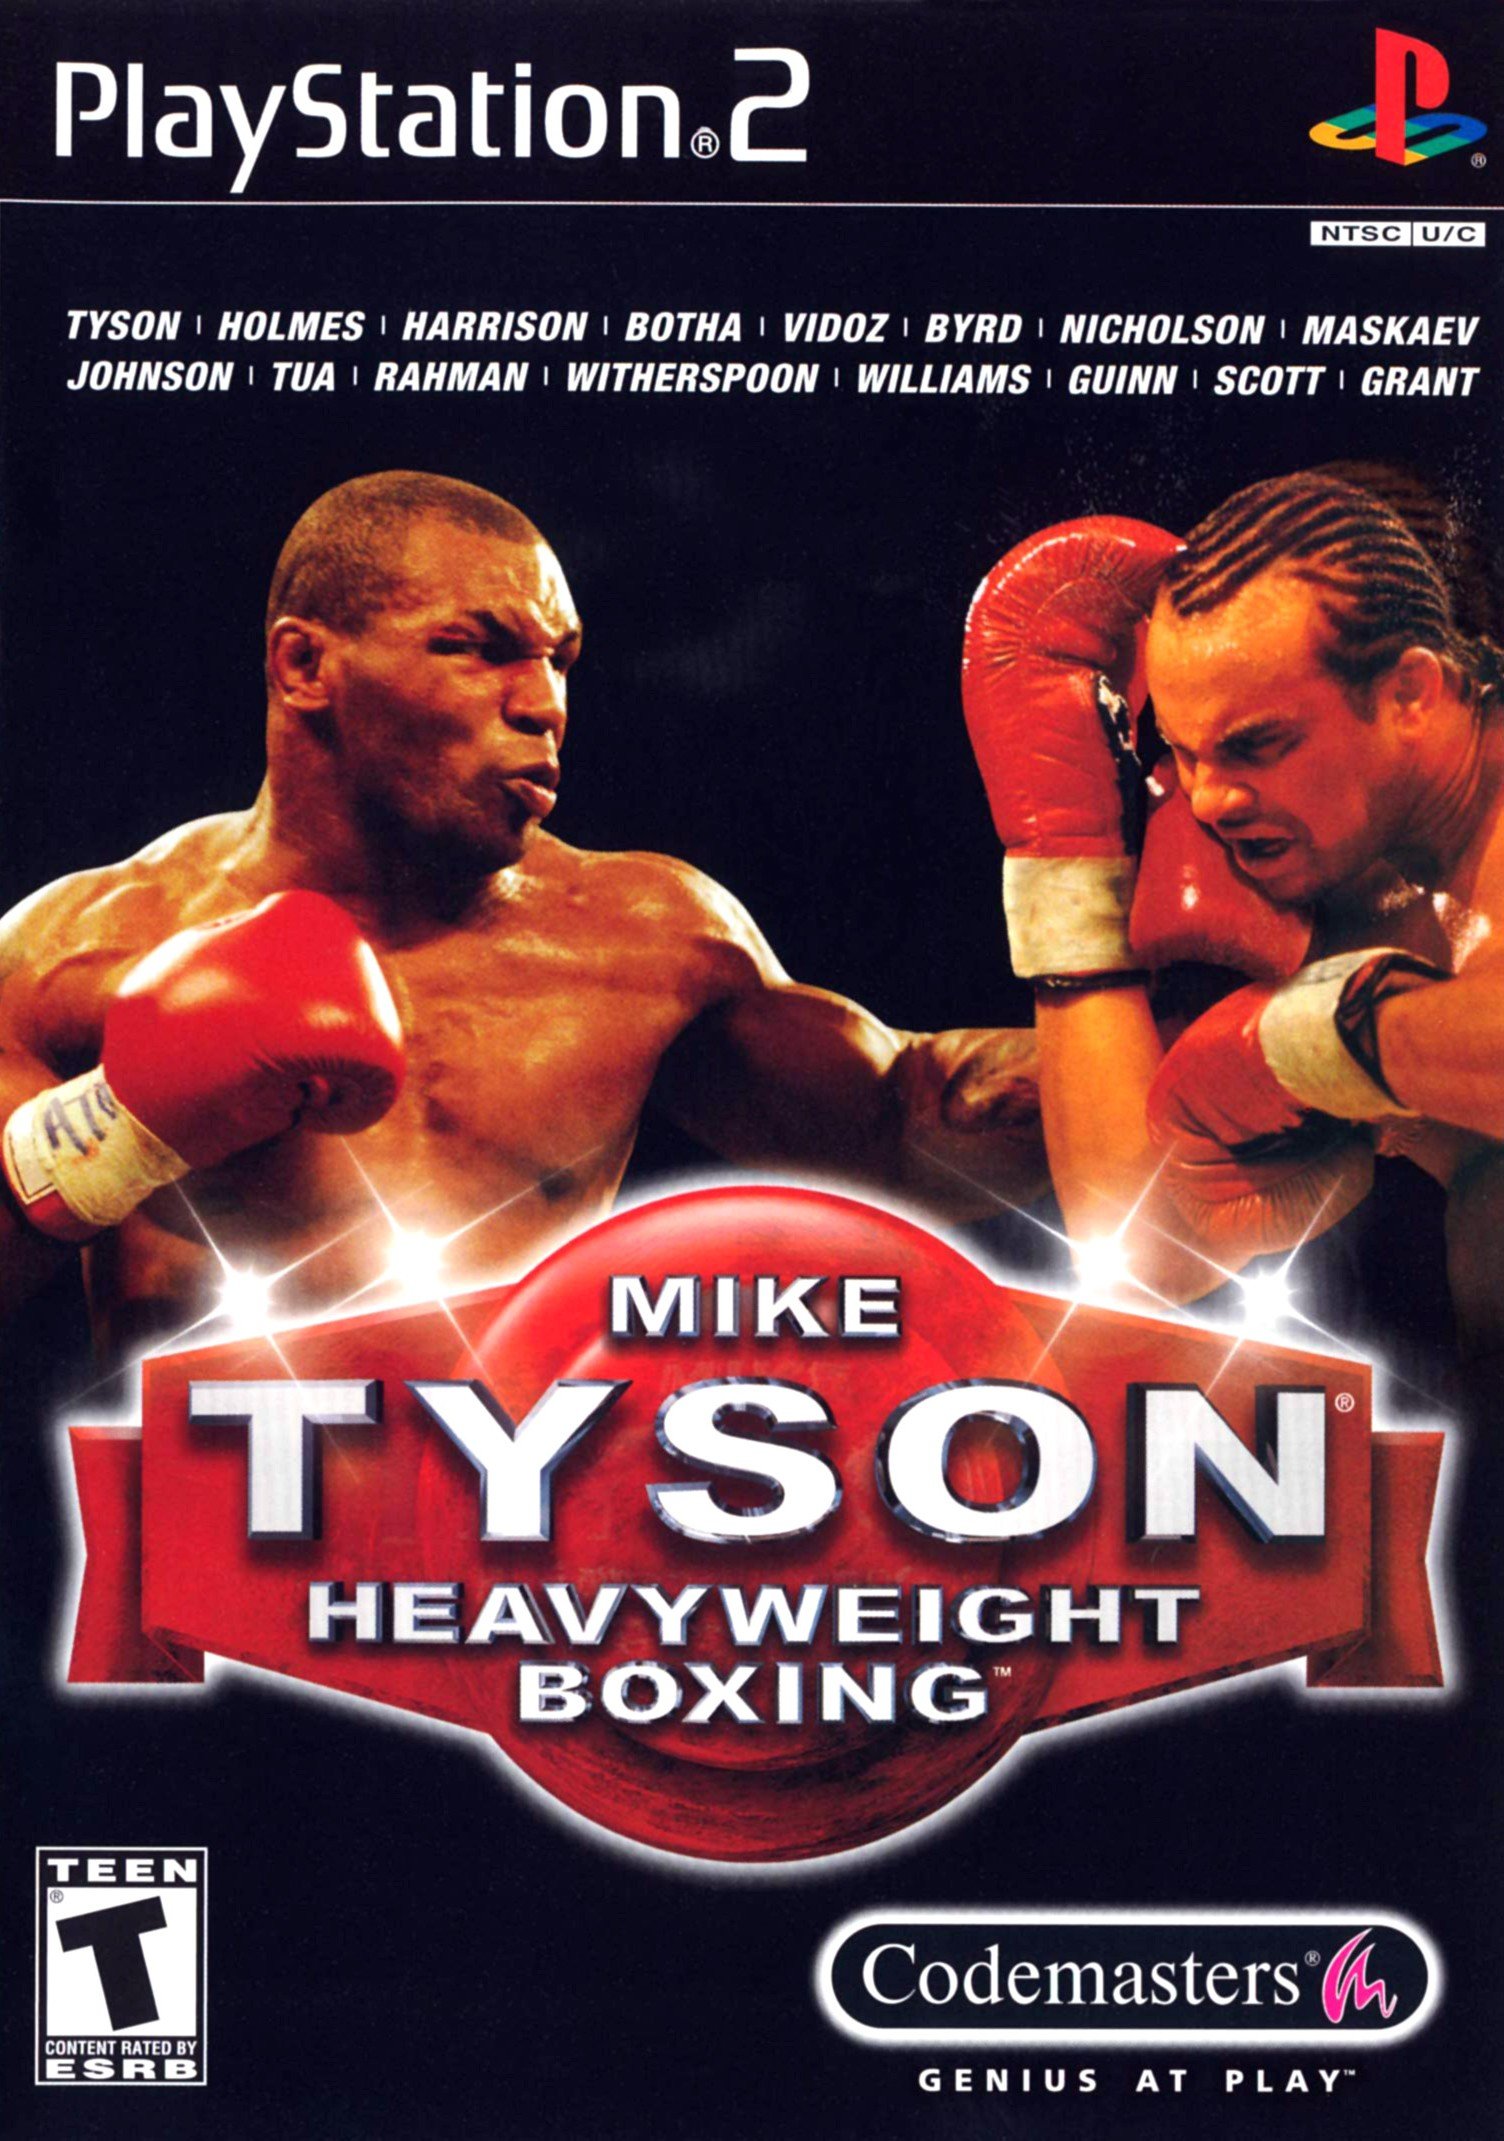 Image of Mike Tyson Heavyweight Boxing